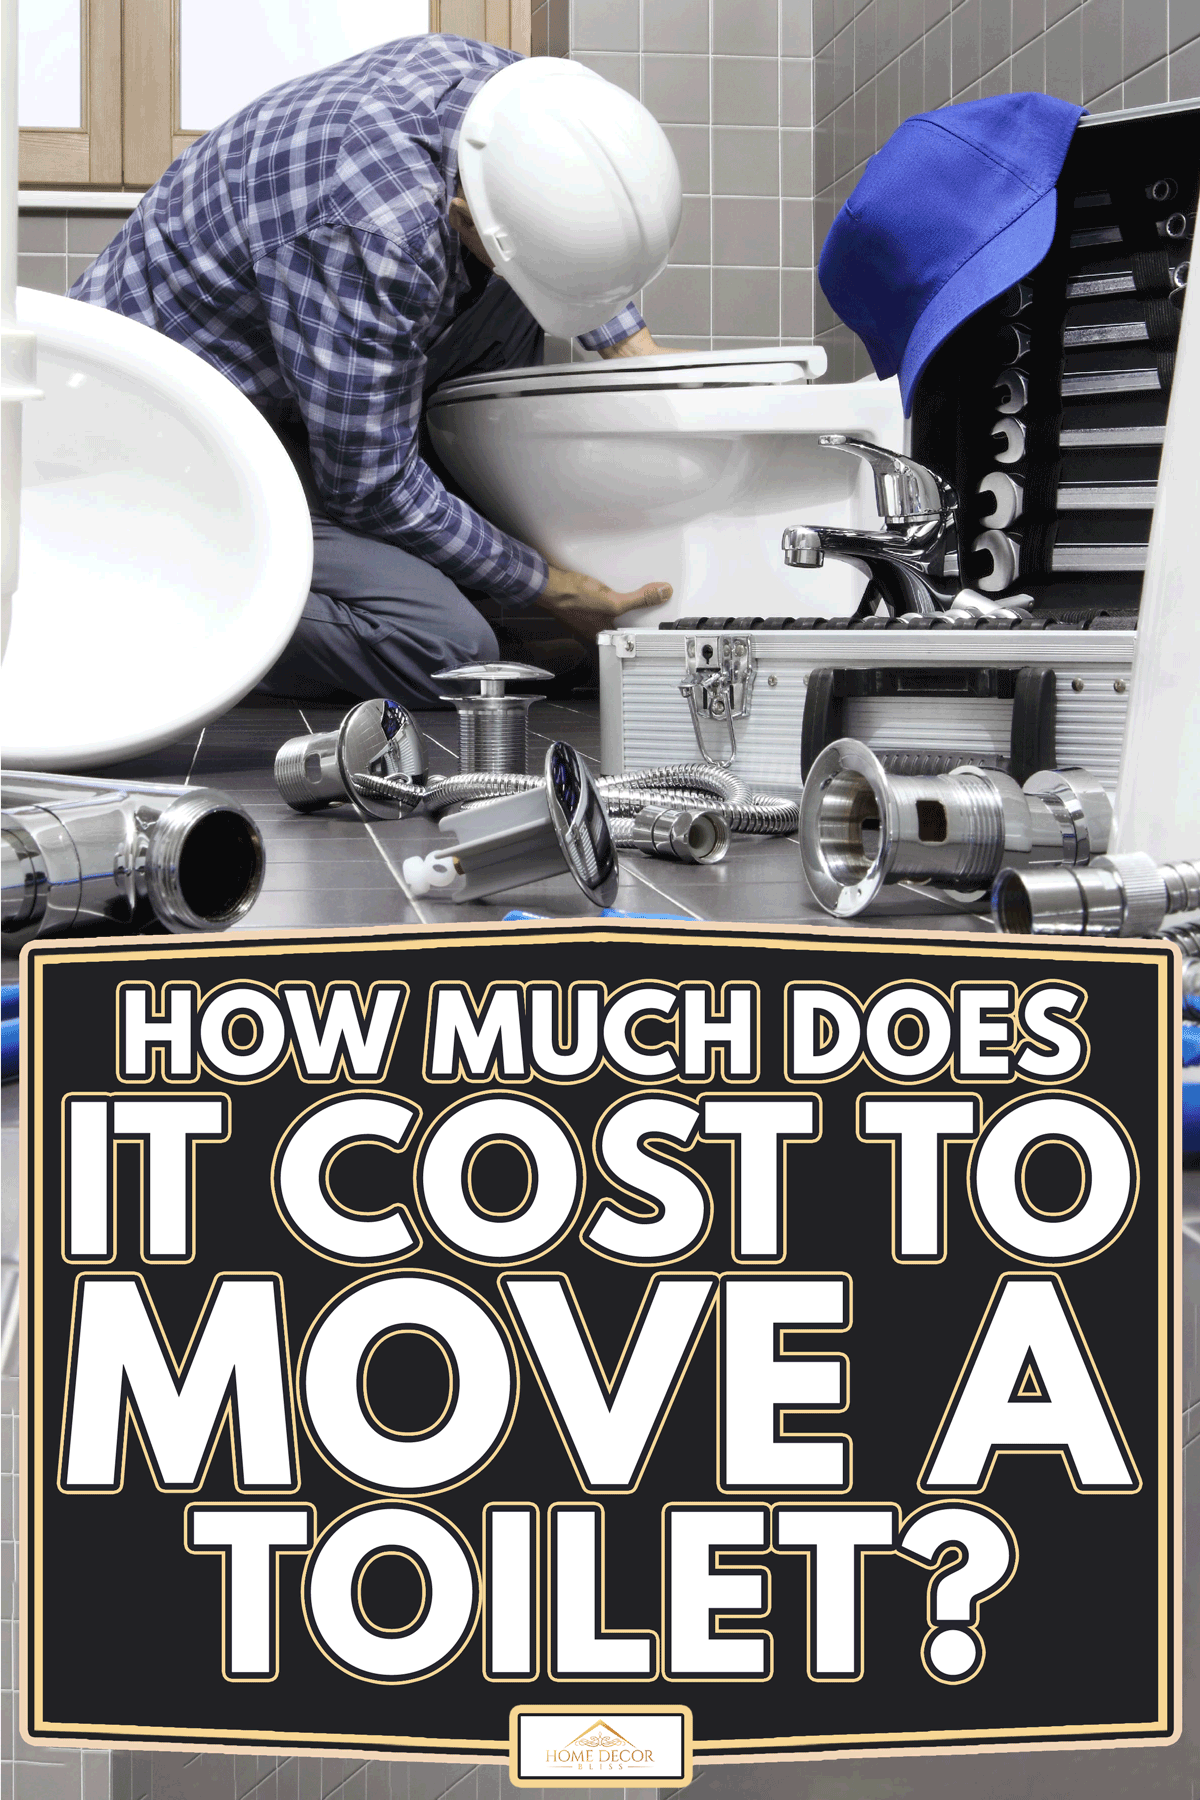 Plumber fixing toilet in the bathroom, How Much Does It Cost To Move A Toilet?